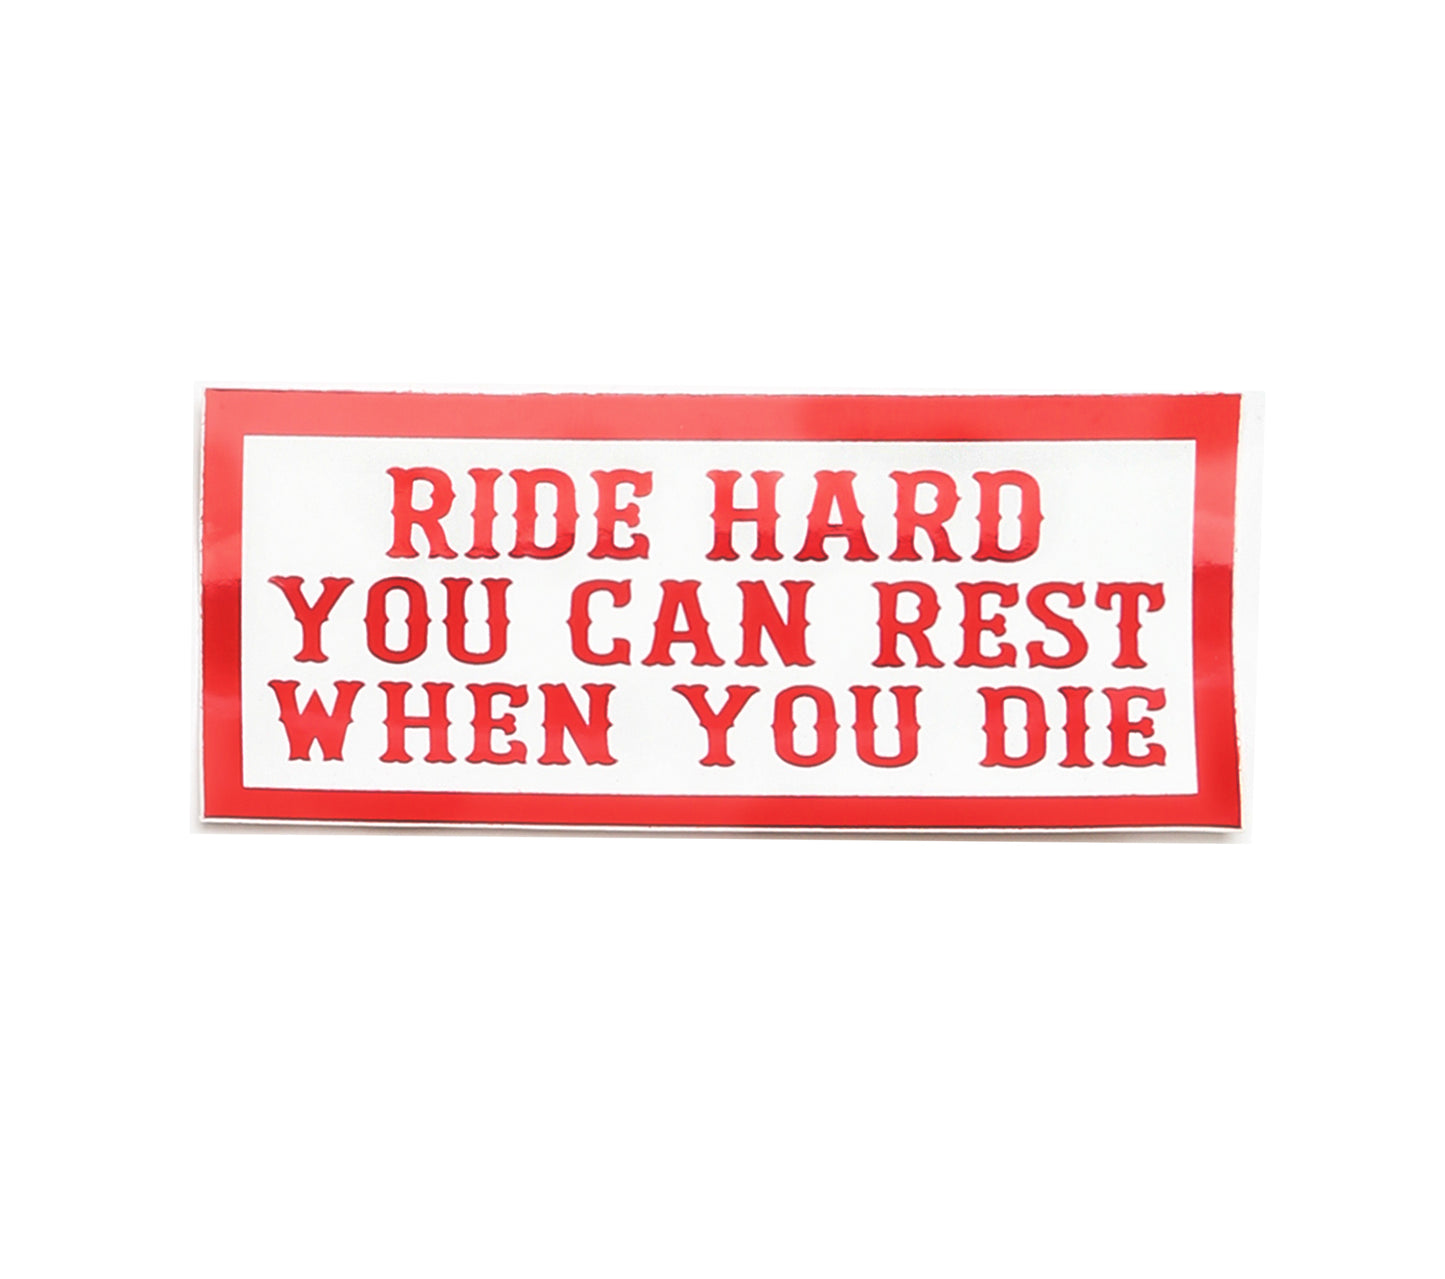 Sticker - RIDE HARD YOU CAN REST WHEN YOU DIE